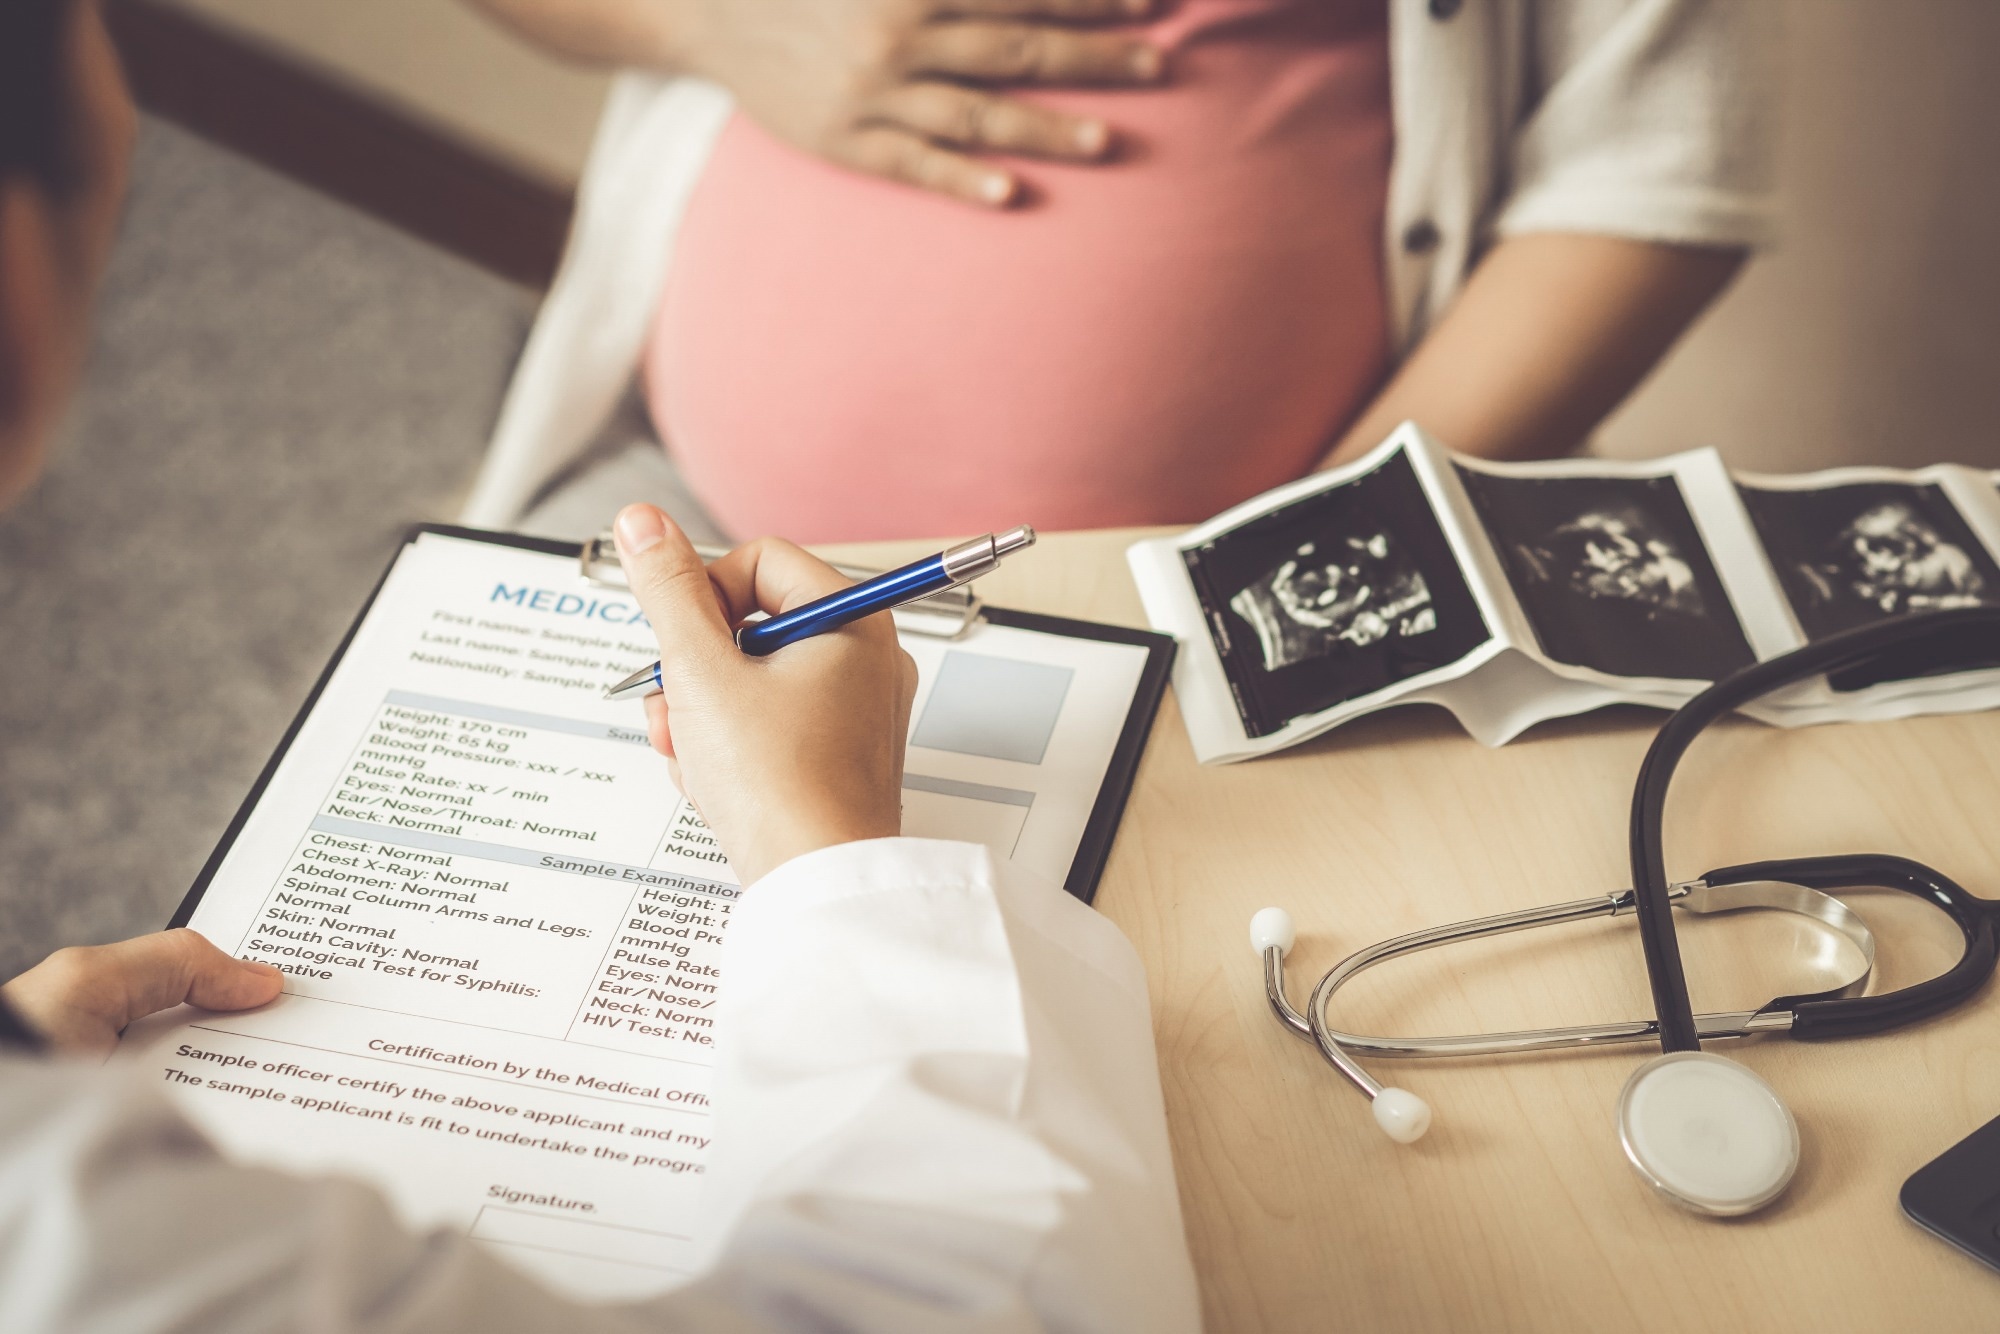 Study: Maternal Obesity and Gut Microbiota Are Associated with Fetal Brain Development. Image Credit: Blue Planet Studio/Shutterstock